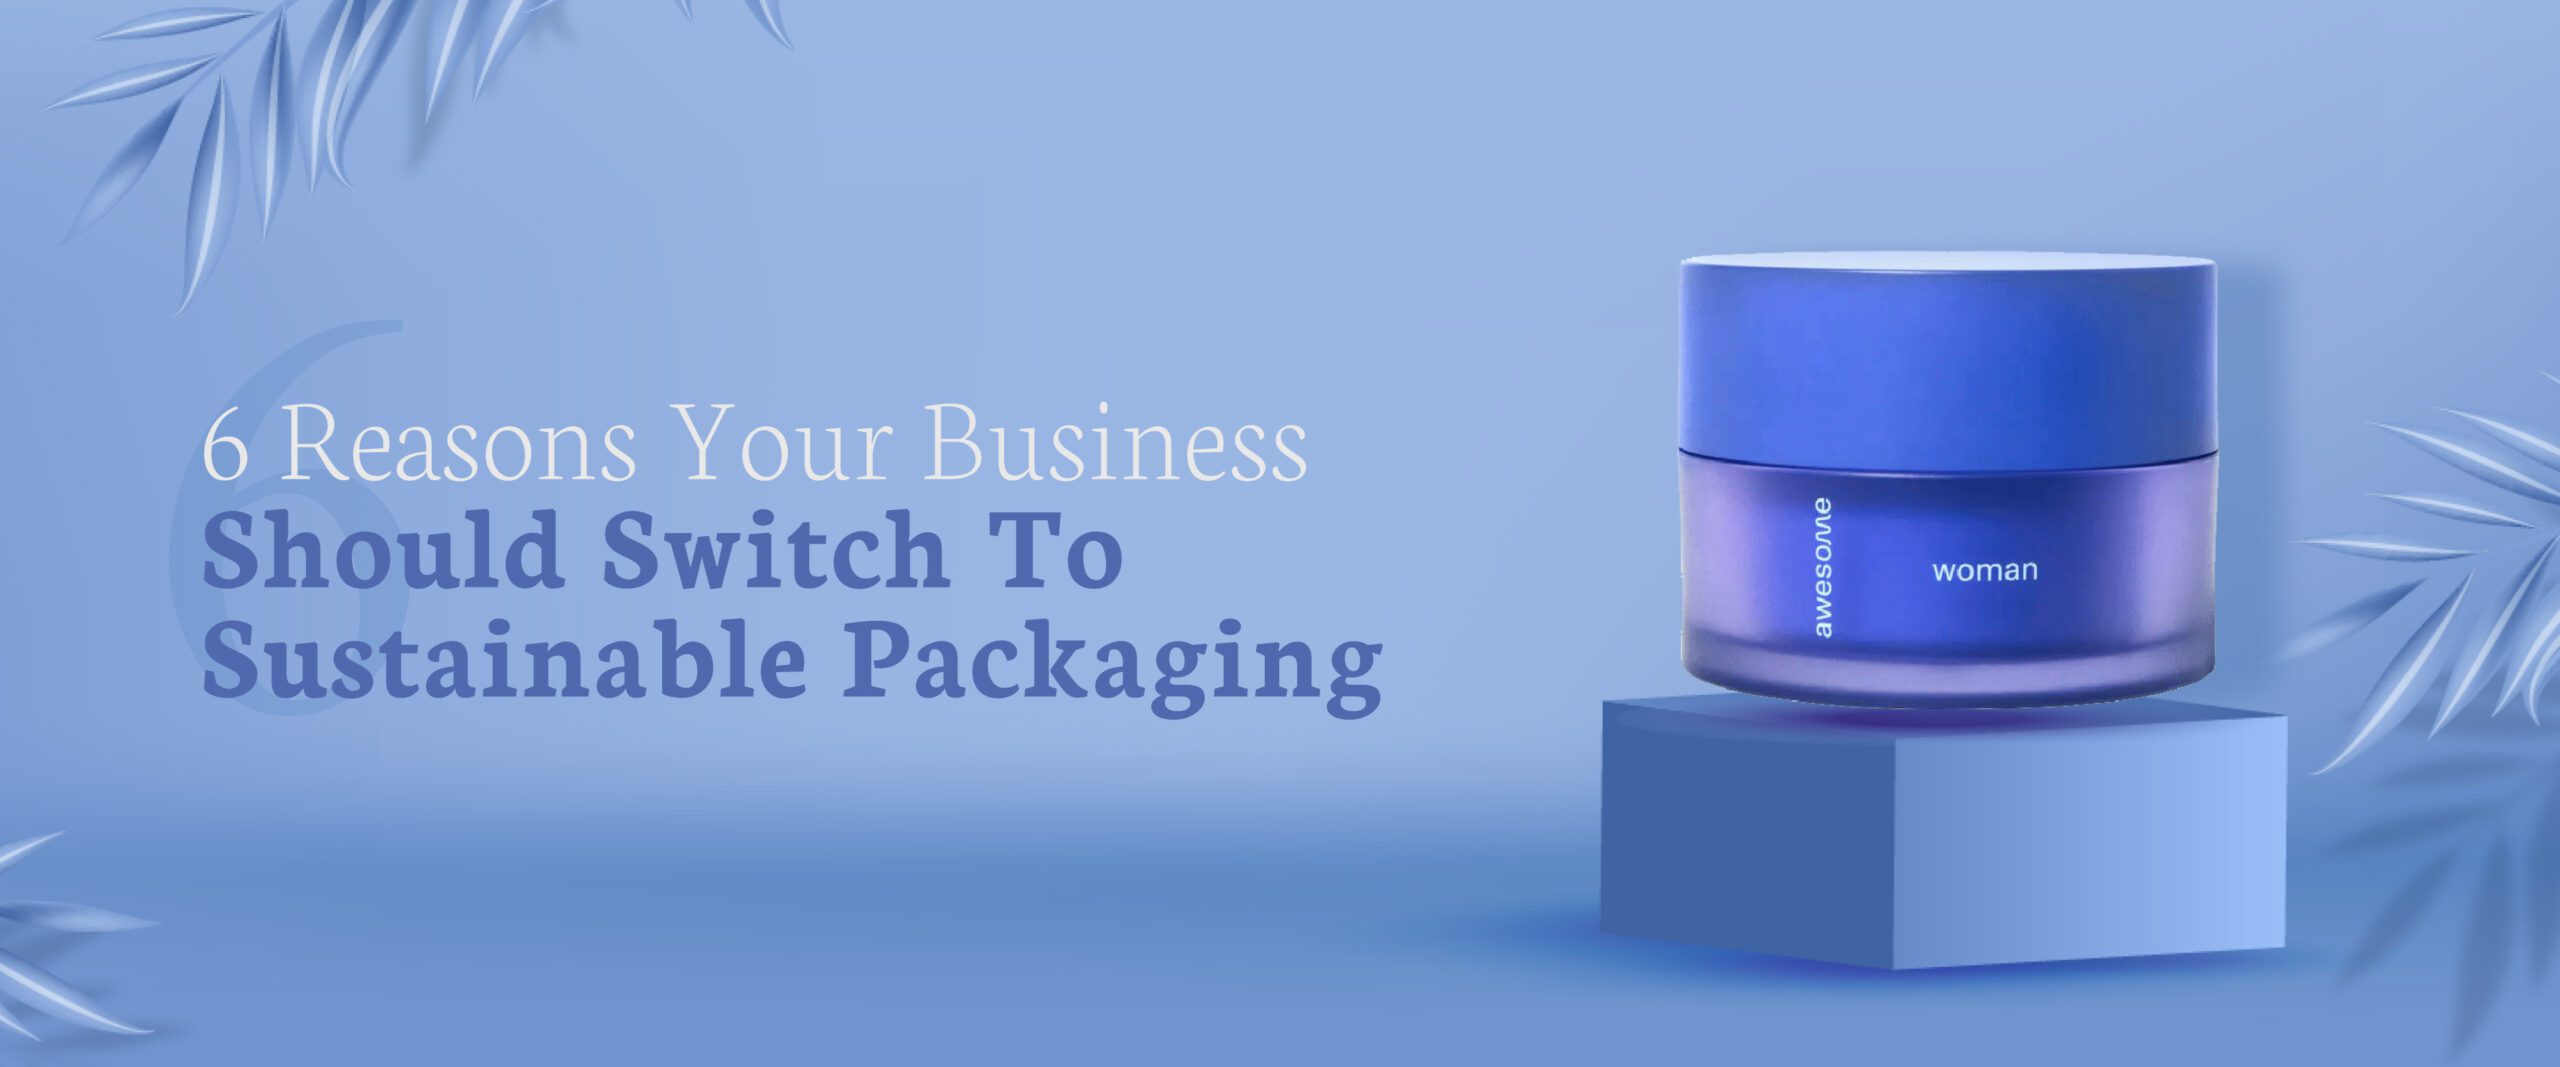 6 Reasons Your Business Should Switch to Sustainable Packaging